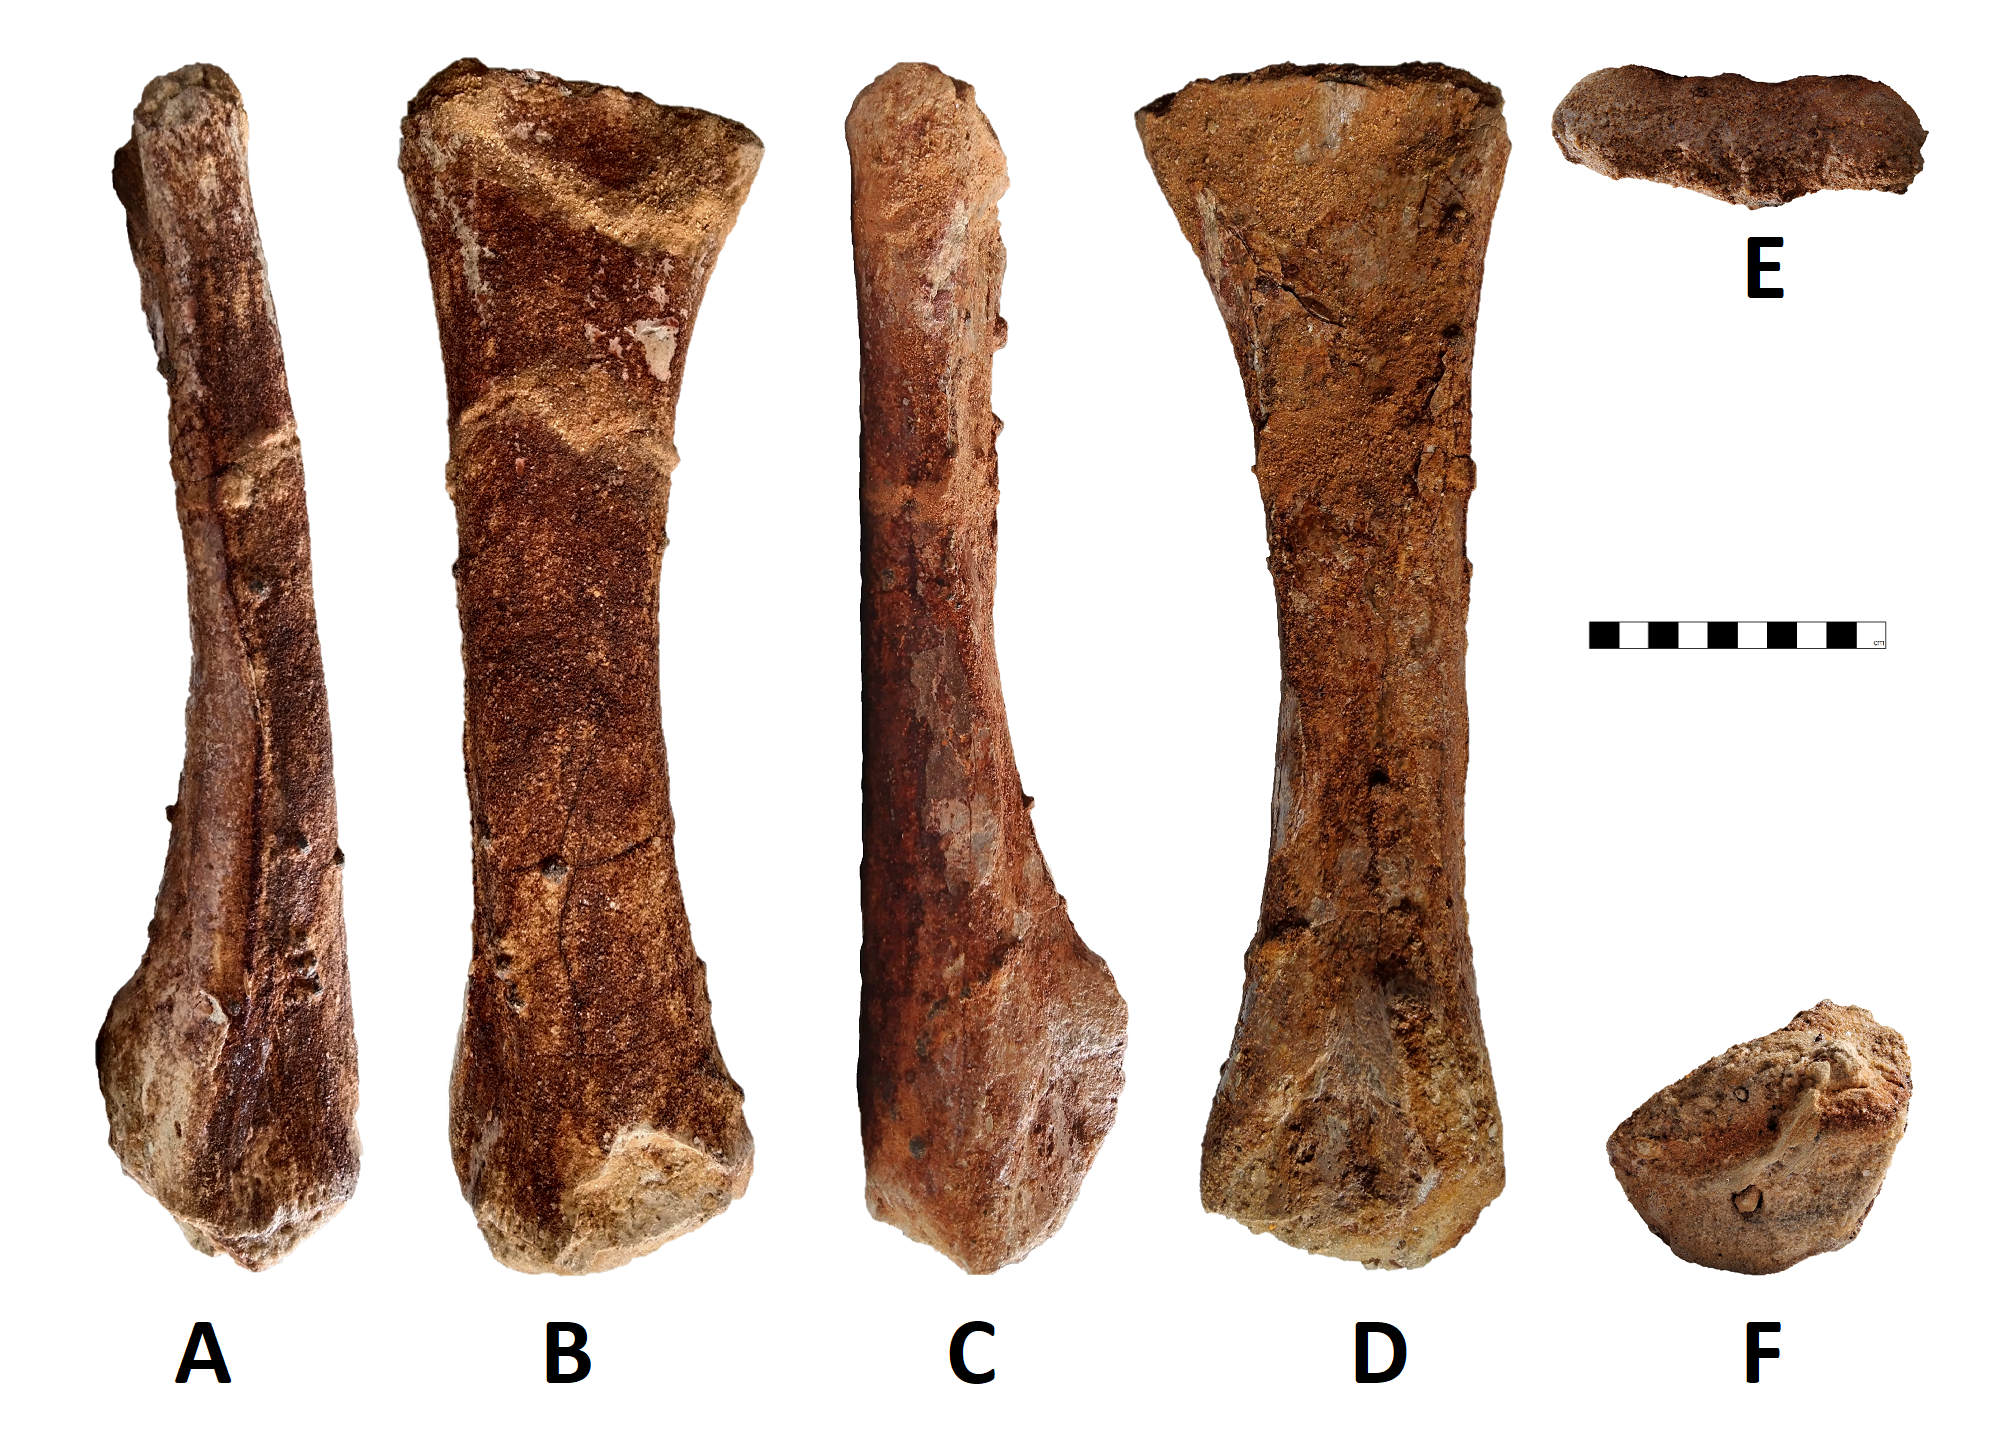 Left radius (GCE2104204947) of Spinosaurid tentatively refer as Spinosaurus dorsojuvencus. Start viewing at the back and turn clockwise: A. posterior view (backside); B. lateral view (side view); C. anterior view (front view); D. medial view (internal side); E. proximal view (top view); F. distal view (bottom view)